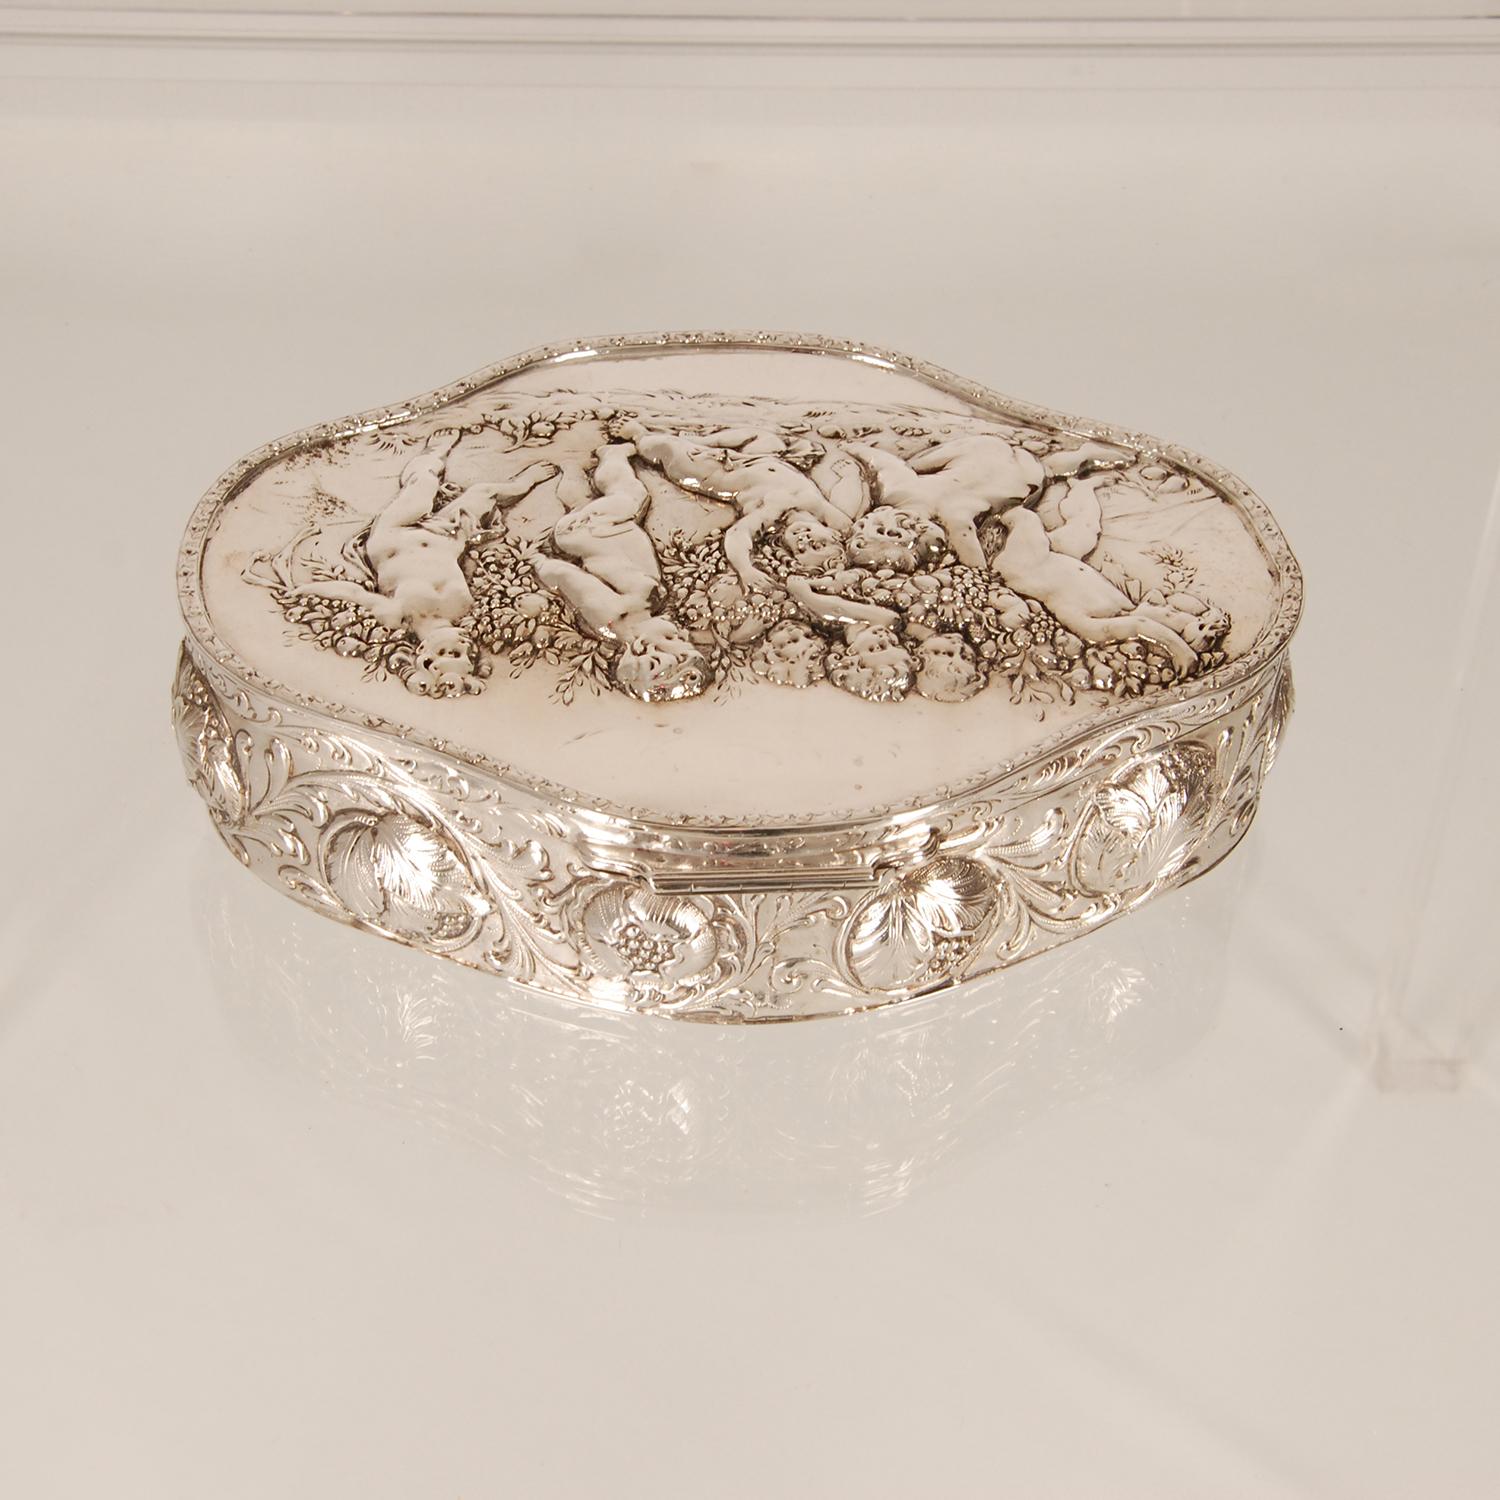 Hanau Silver Jewelry Box J.D.Schleissner and Sons Antique German Casket Putto For Sale 4